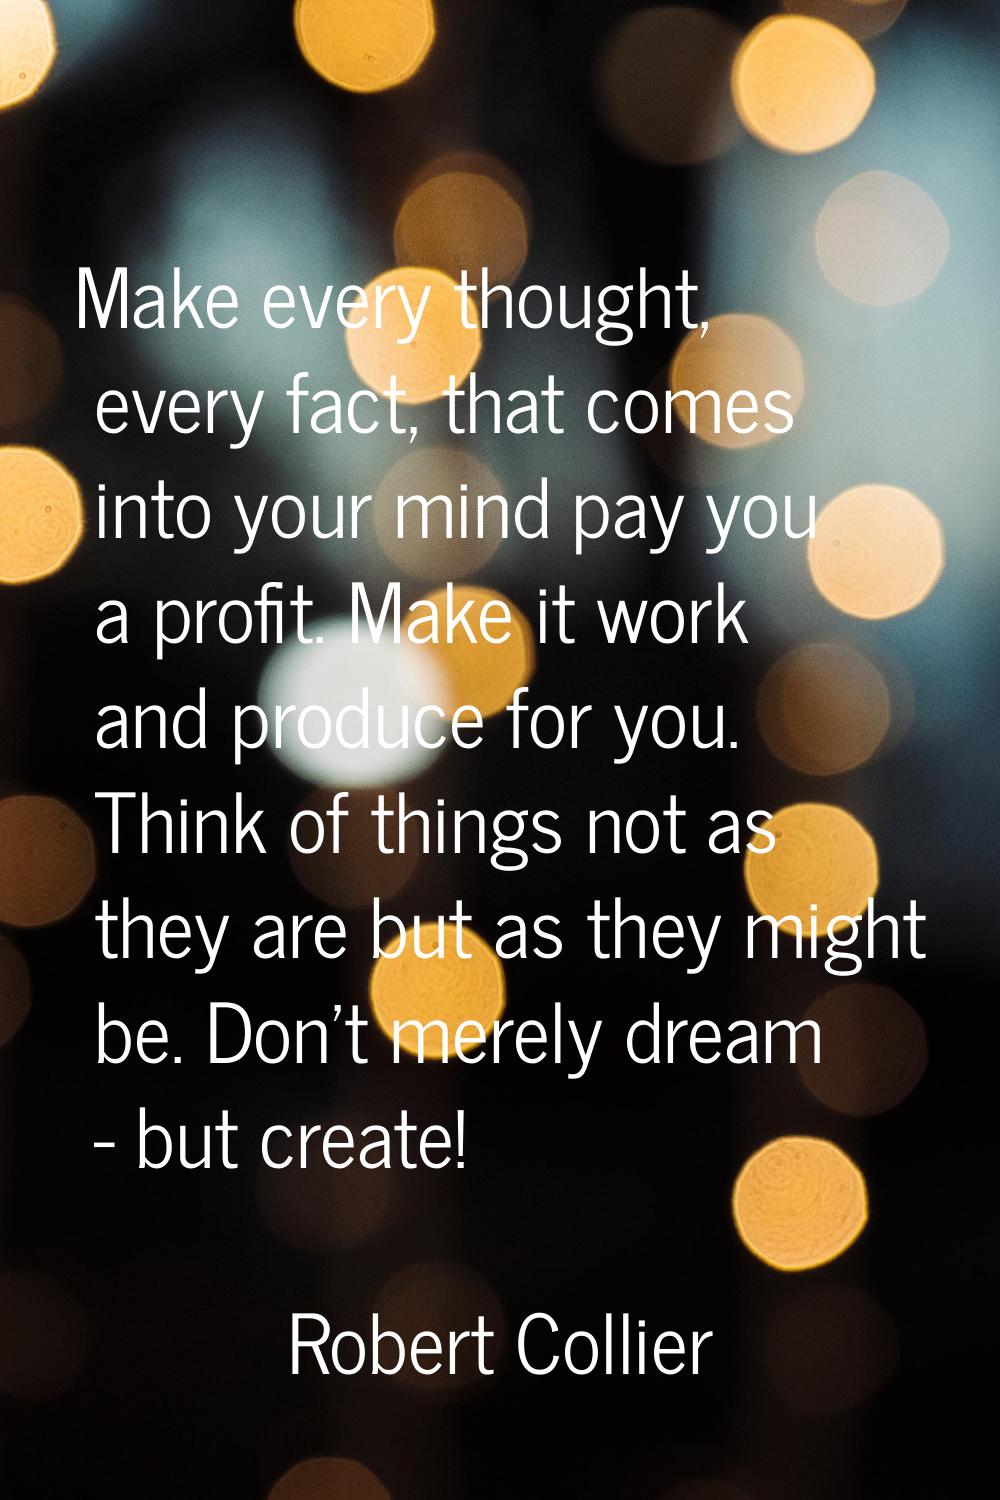 Make every thought, every fact, that comes into your mind pay you a profit. Make it work and produc